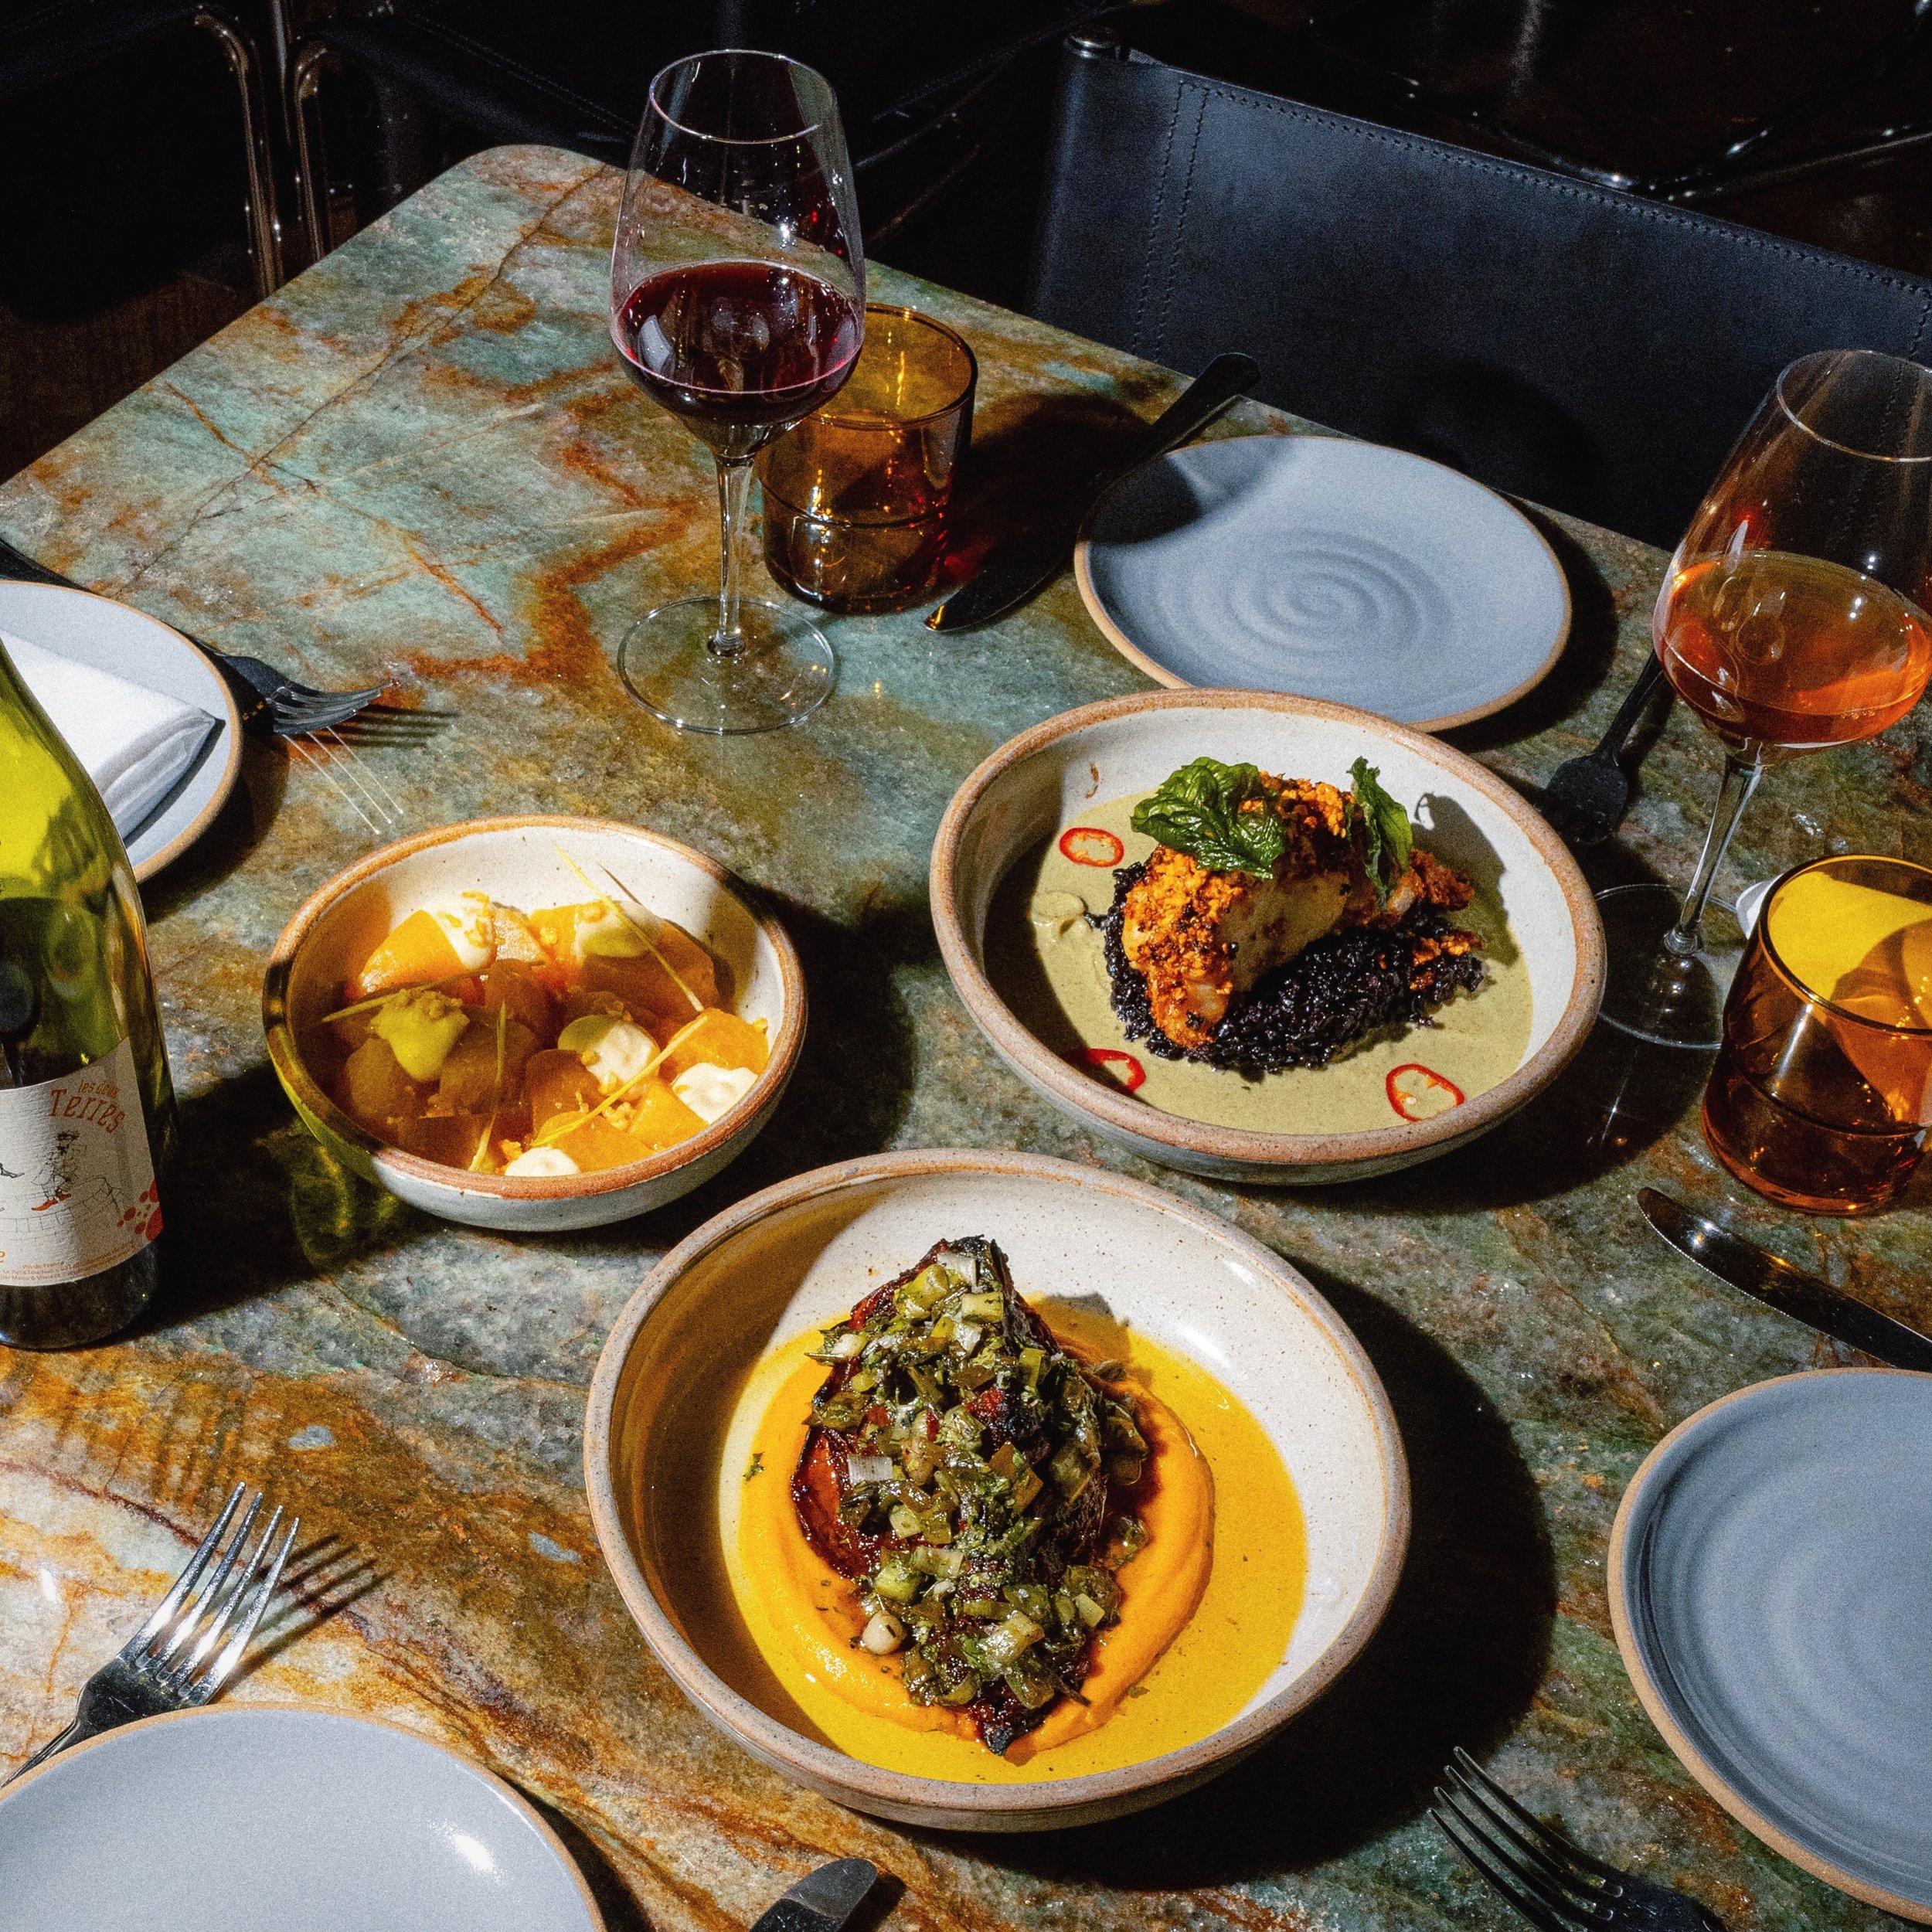 Some of our spring menu favorites&hellip;

ROAST BEETS miso crema, candied mandarin salt, popcorn shoots 

CHARRED CABBAGE ancho BBQ, carrot-date pur&eacute;e, grilled scallion chutney 

HAKE green curry, crispy black rice, peanut crumble

📷 @spence